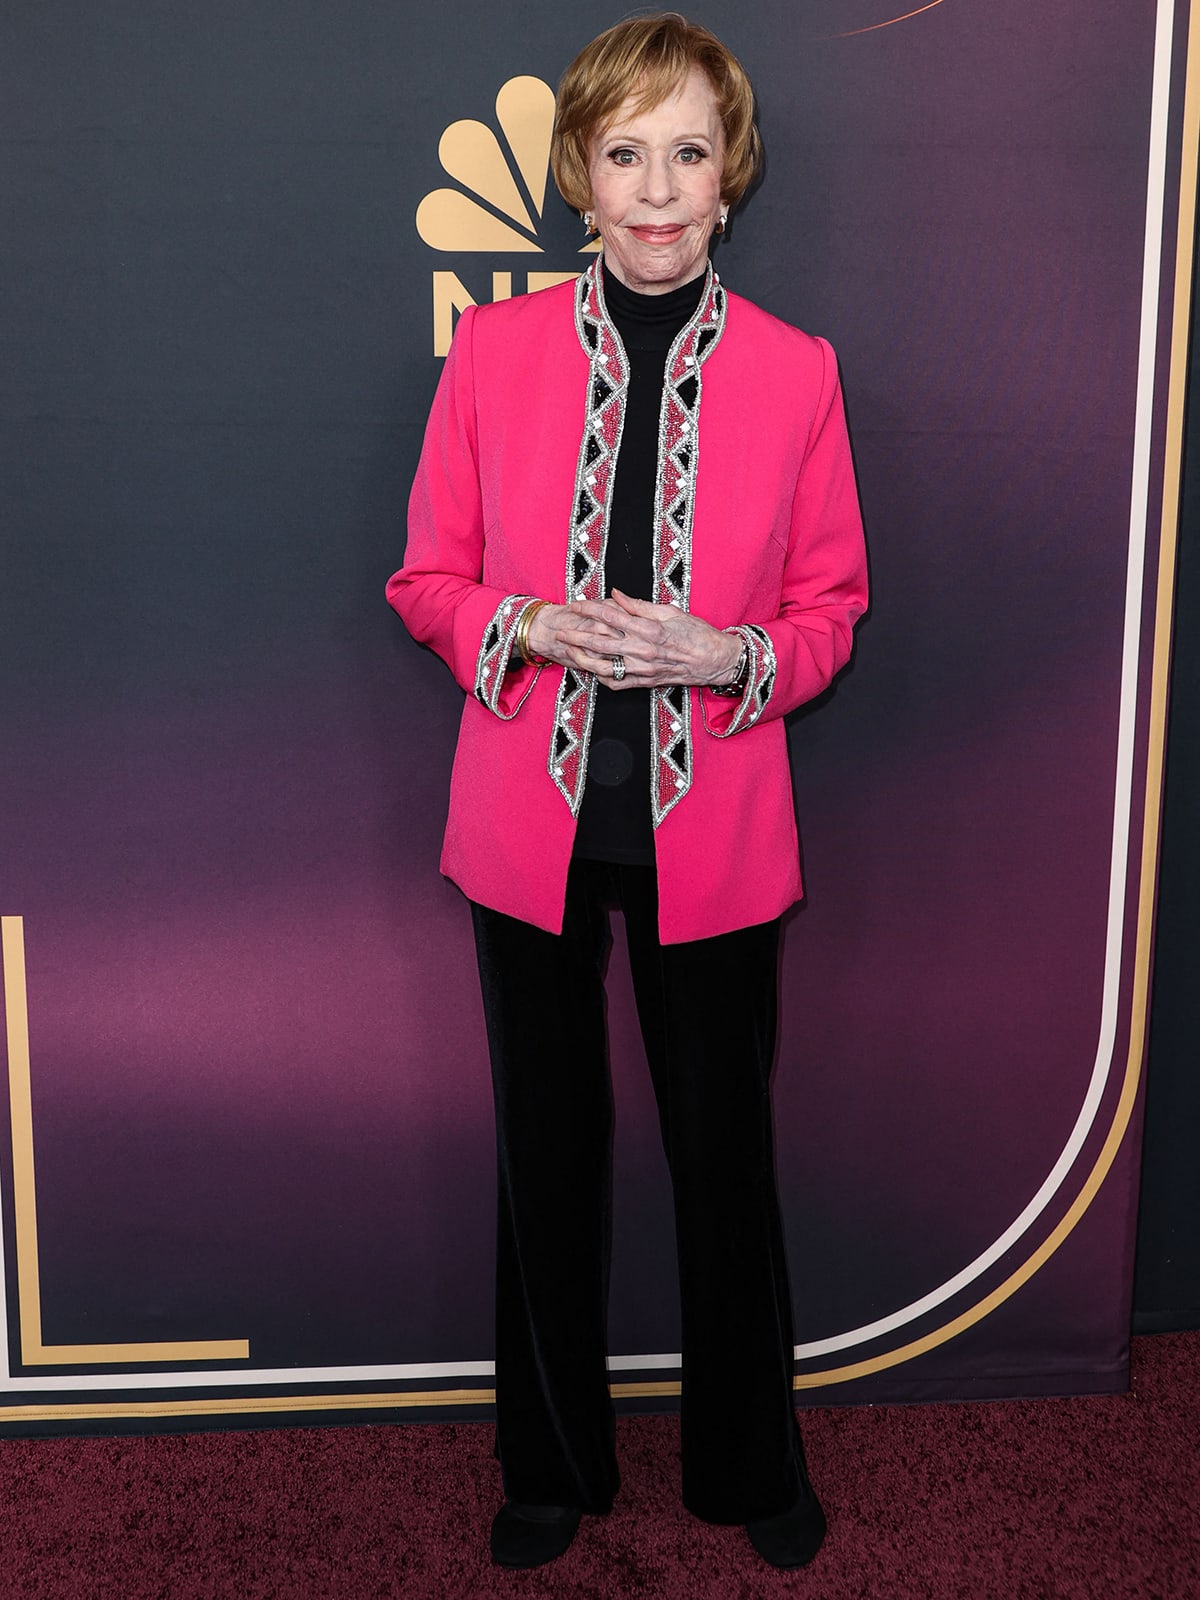 Carol Burnett is celebrating her 90th birthday with an NBC TV special featuring star-studded guests